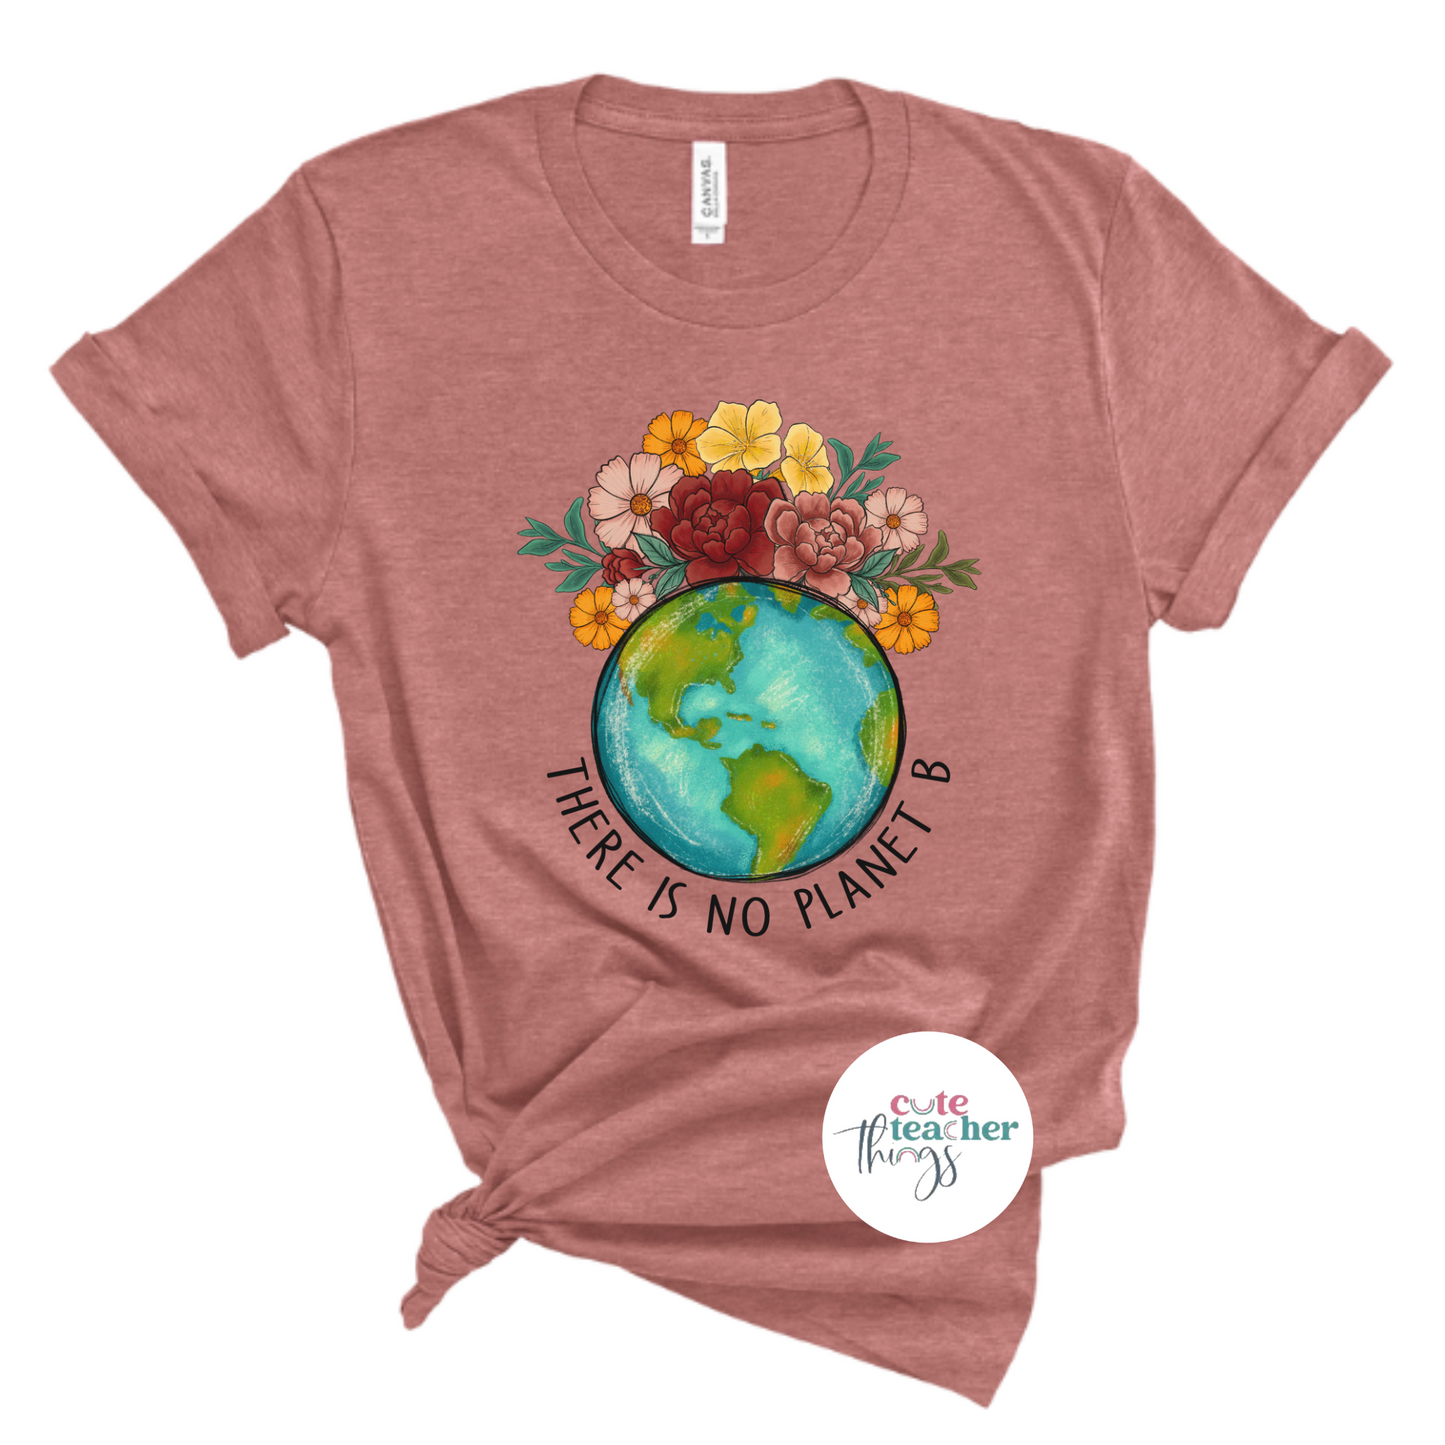 nature conservation, teacher clothing, save the panet t-shirt